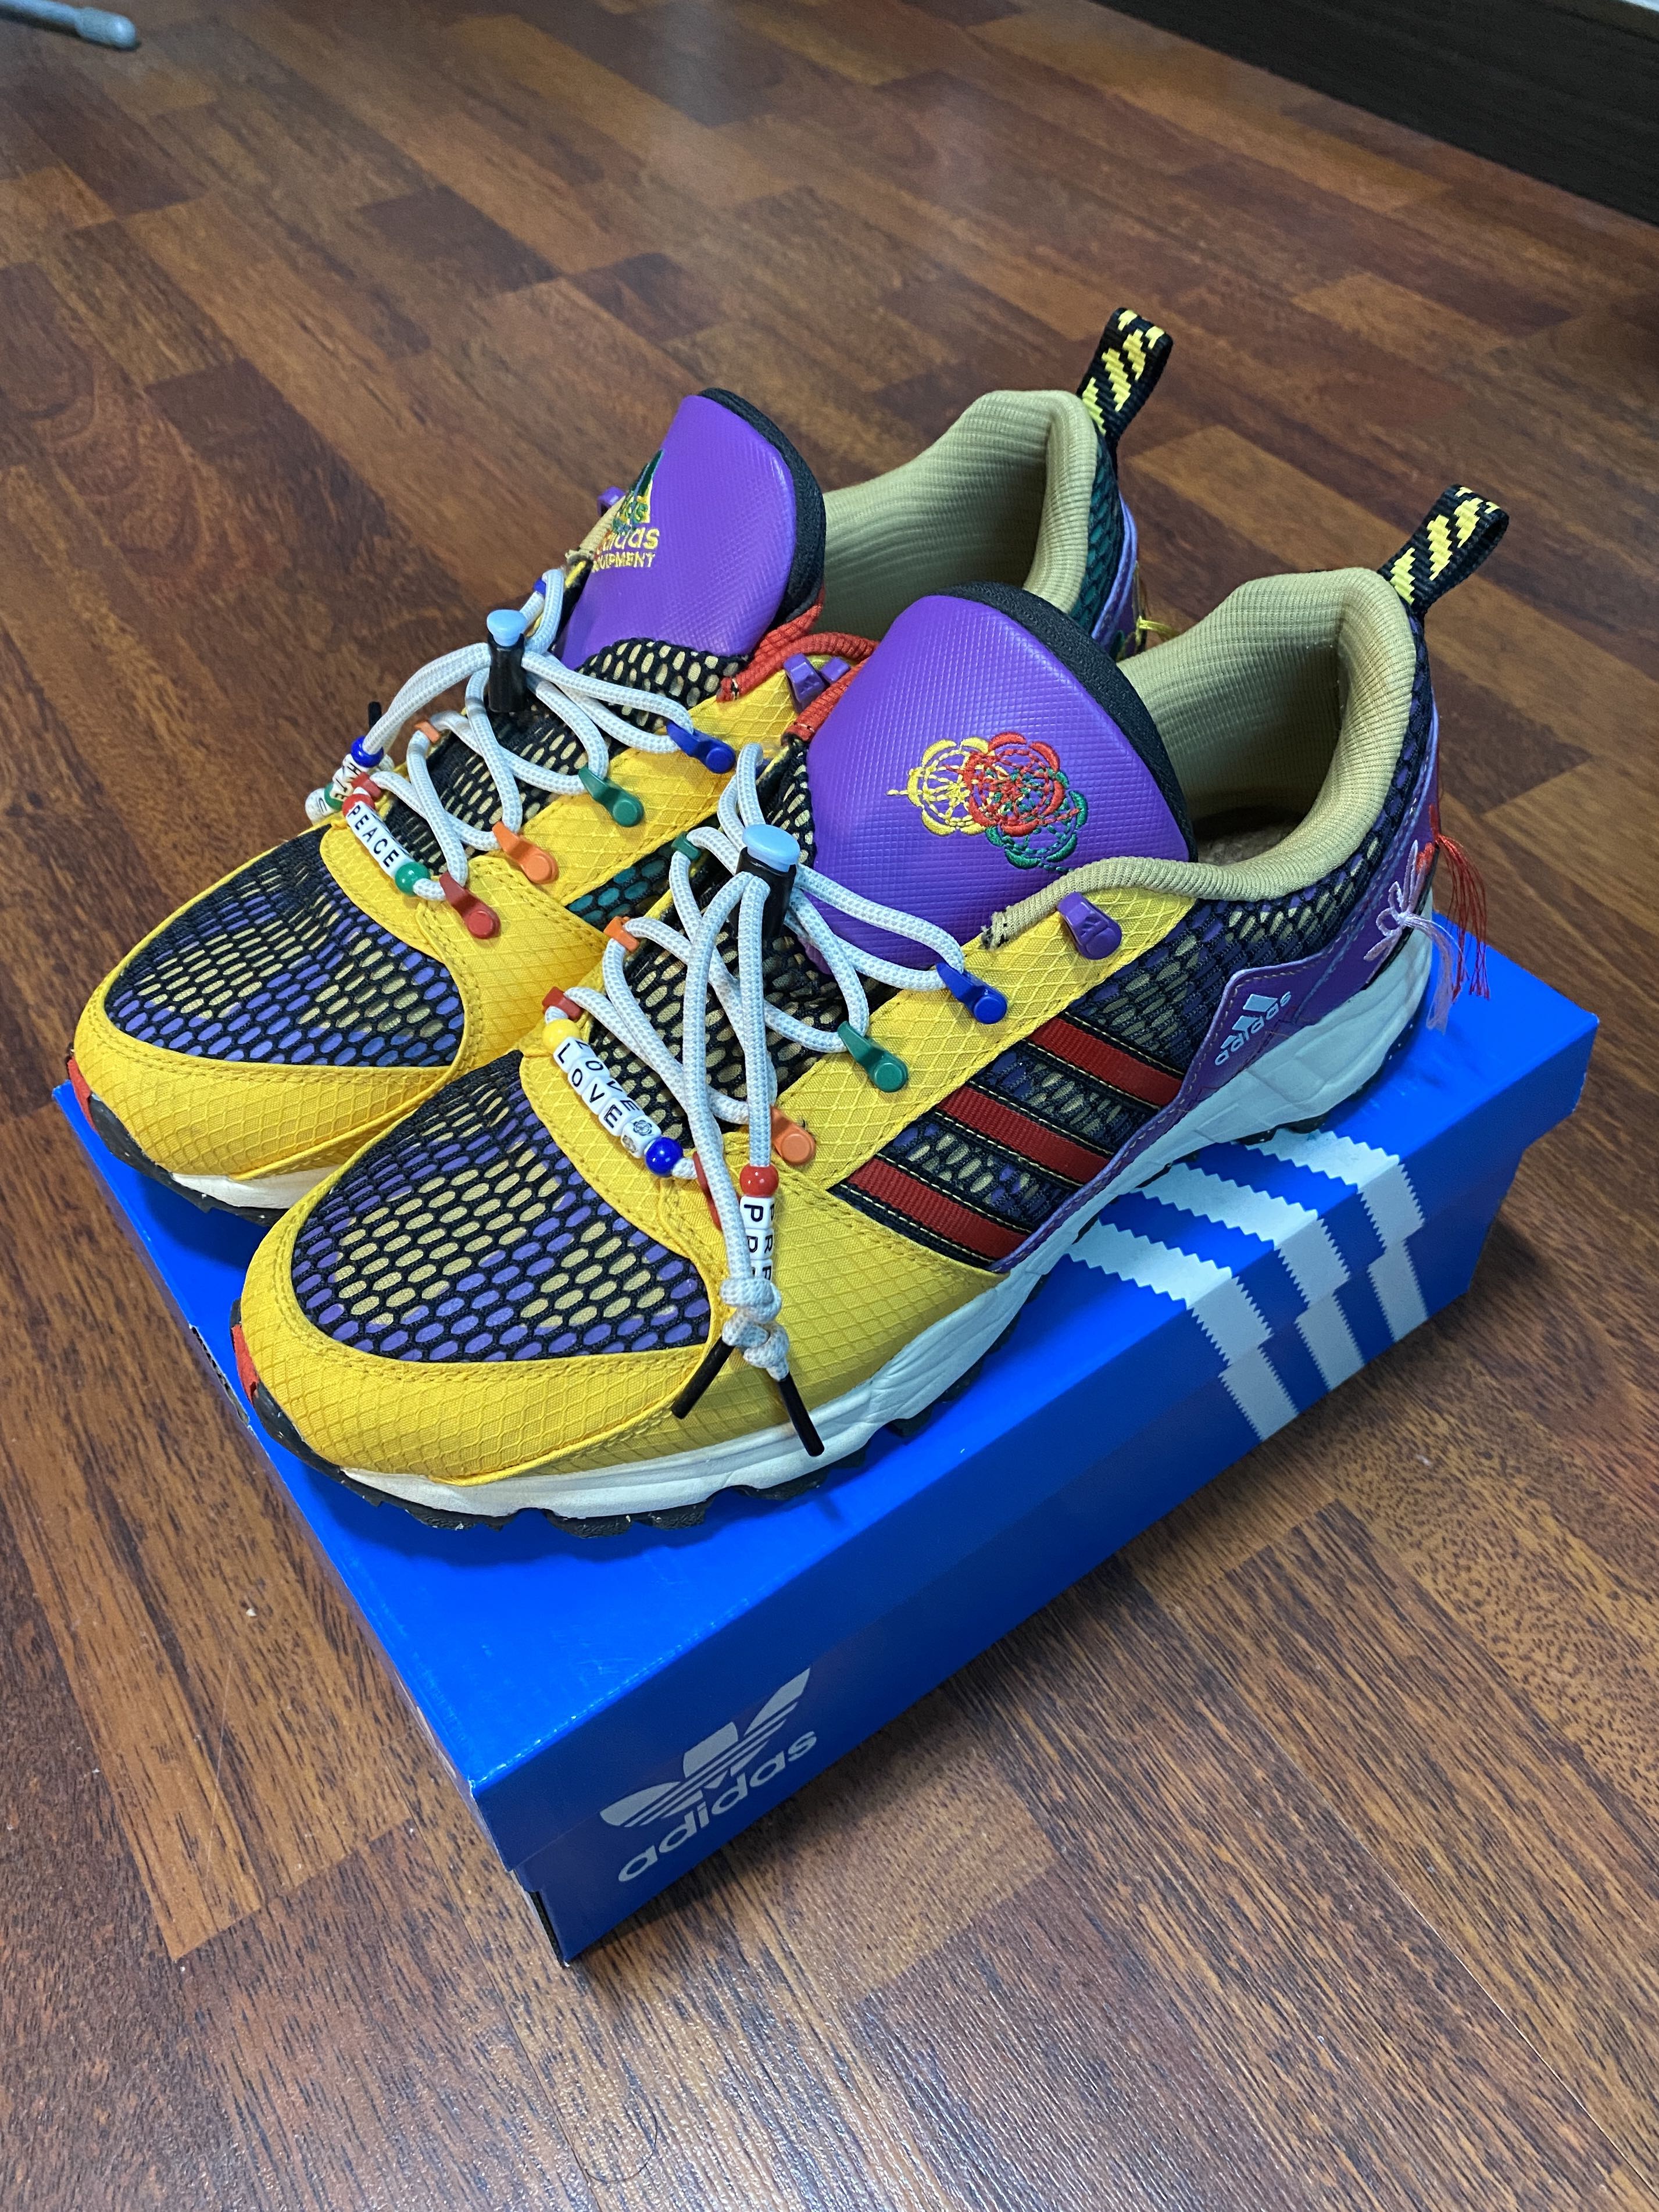 Adidas x Sean Wotherspoon EQT Support , Men's Fashion, Footwear